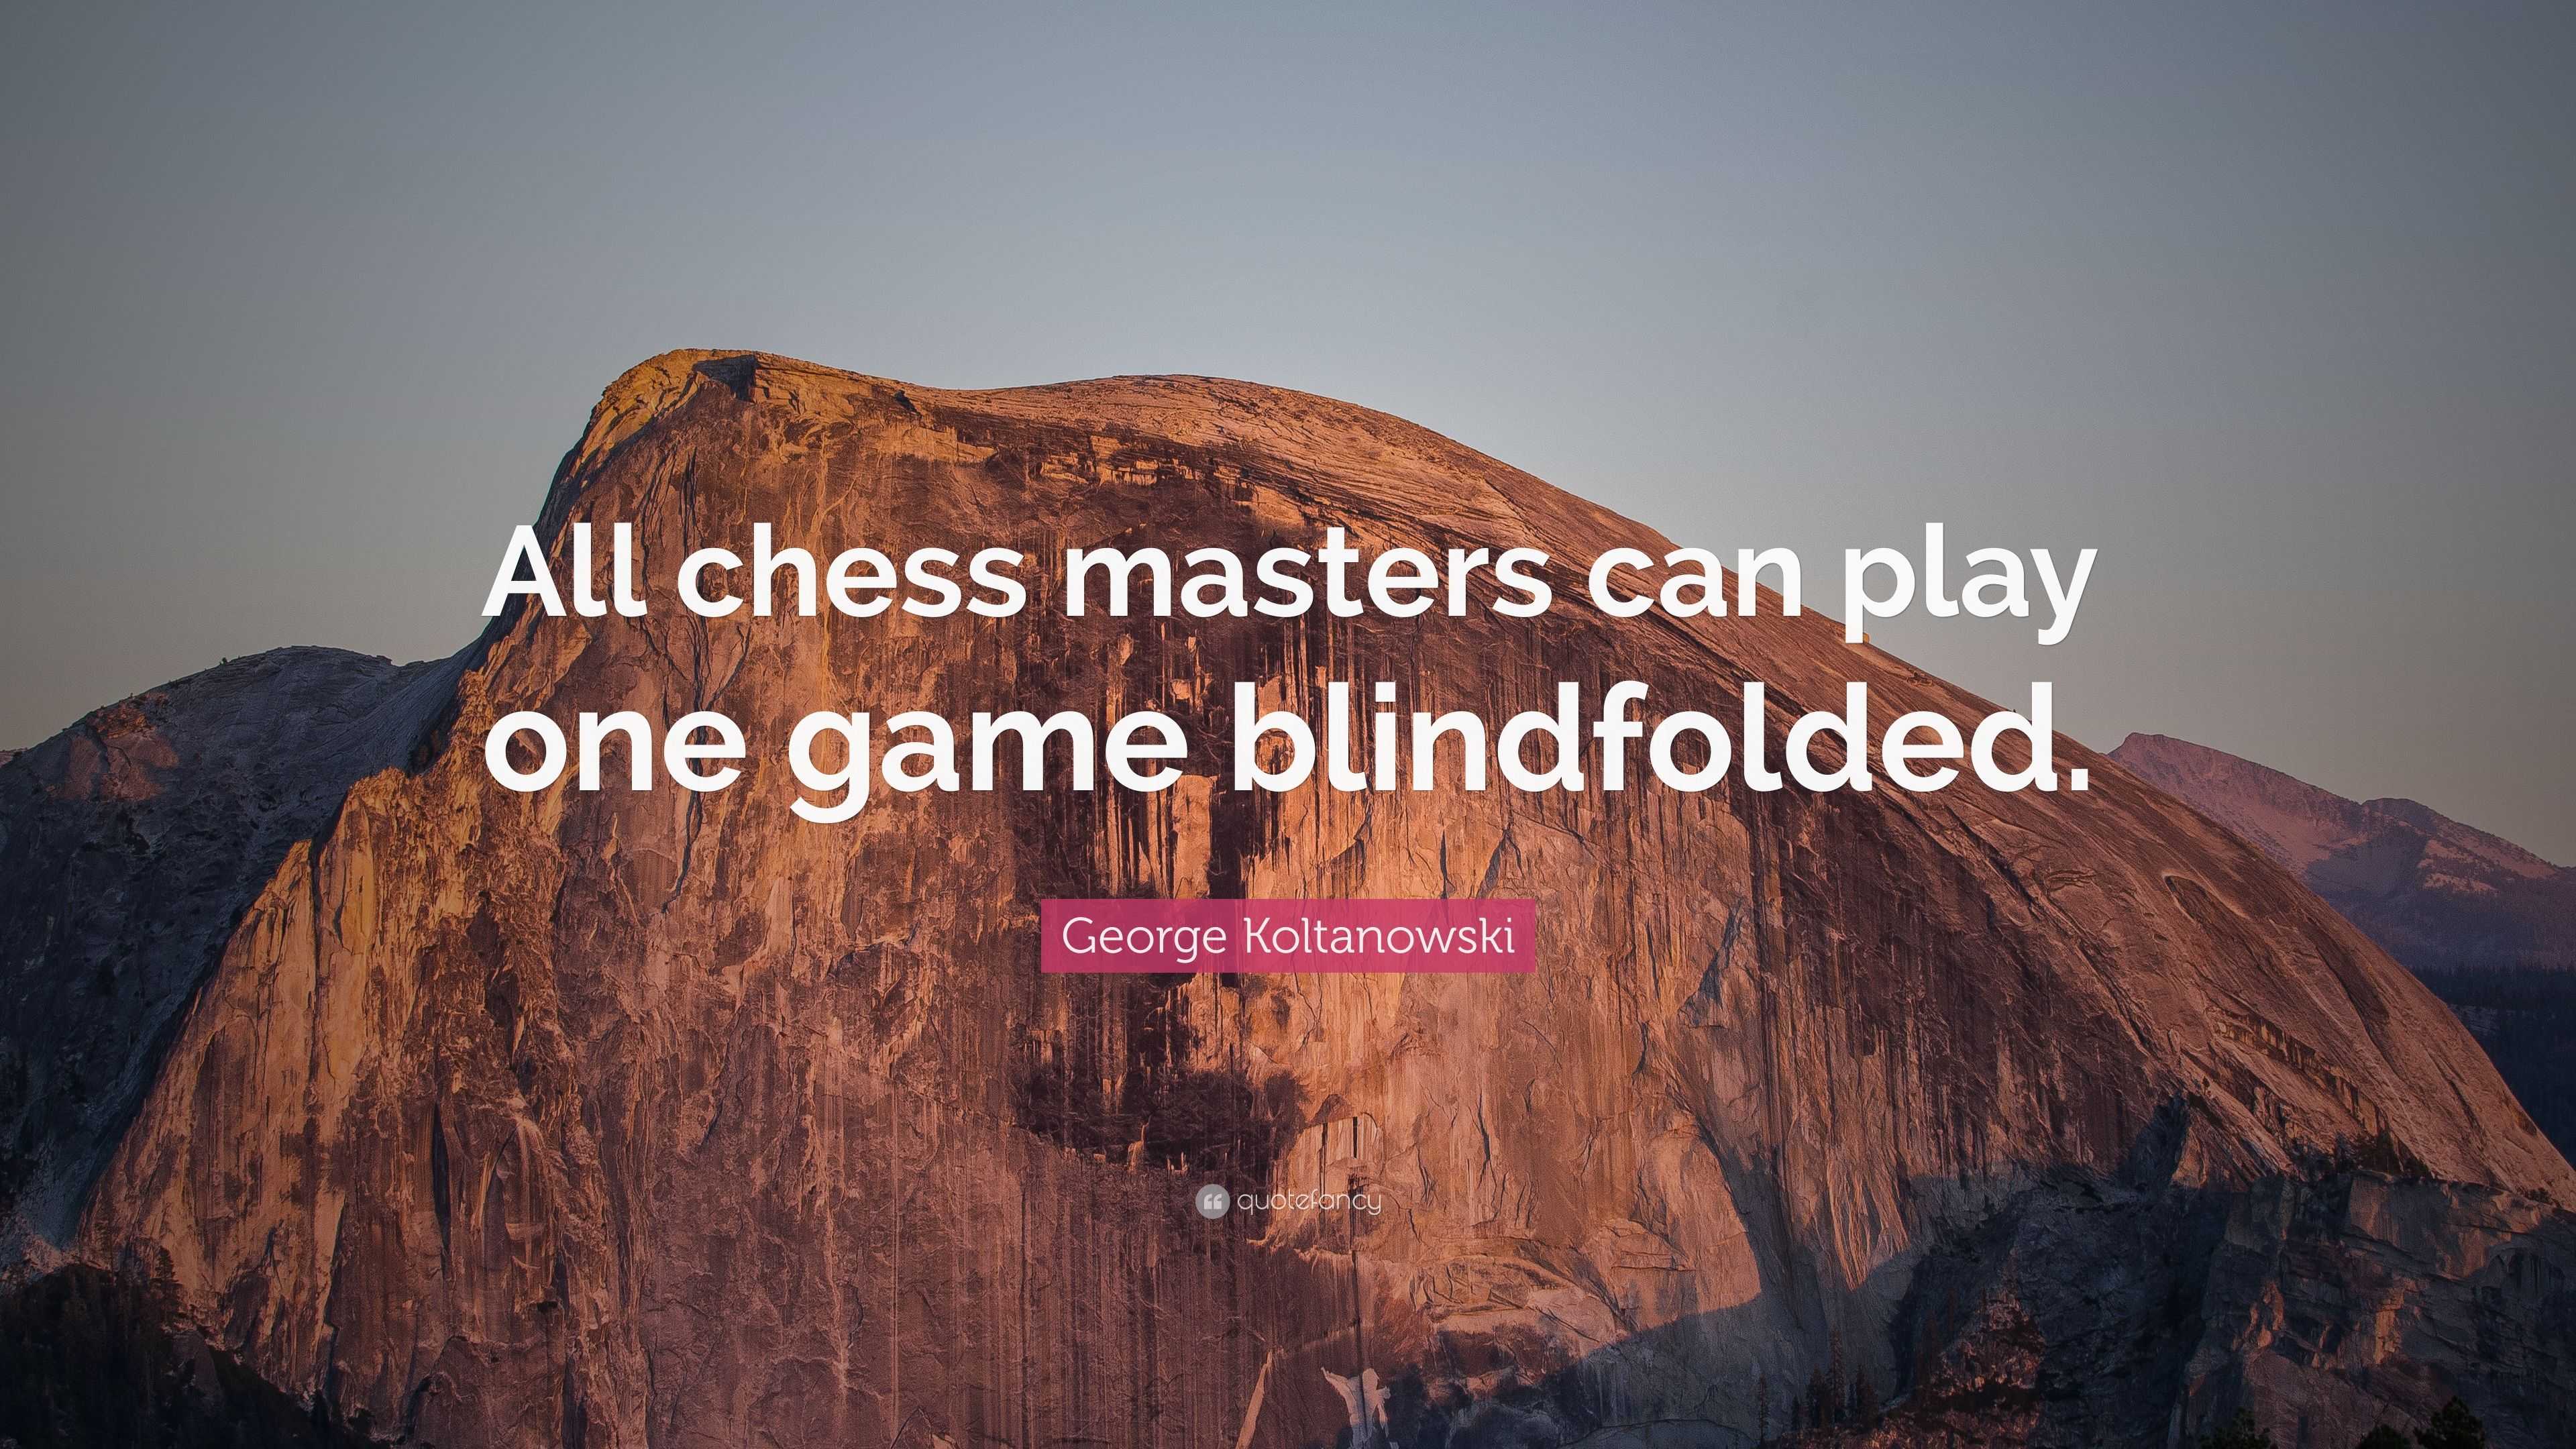 Chess: Quotations From the Masters